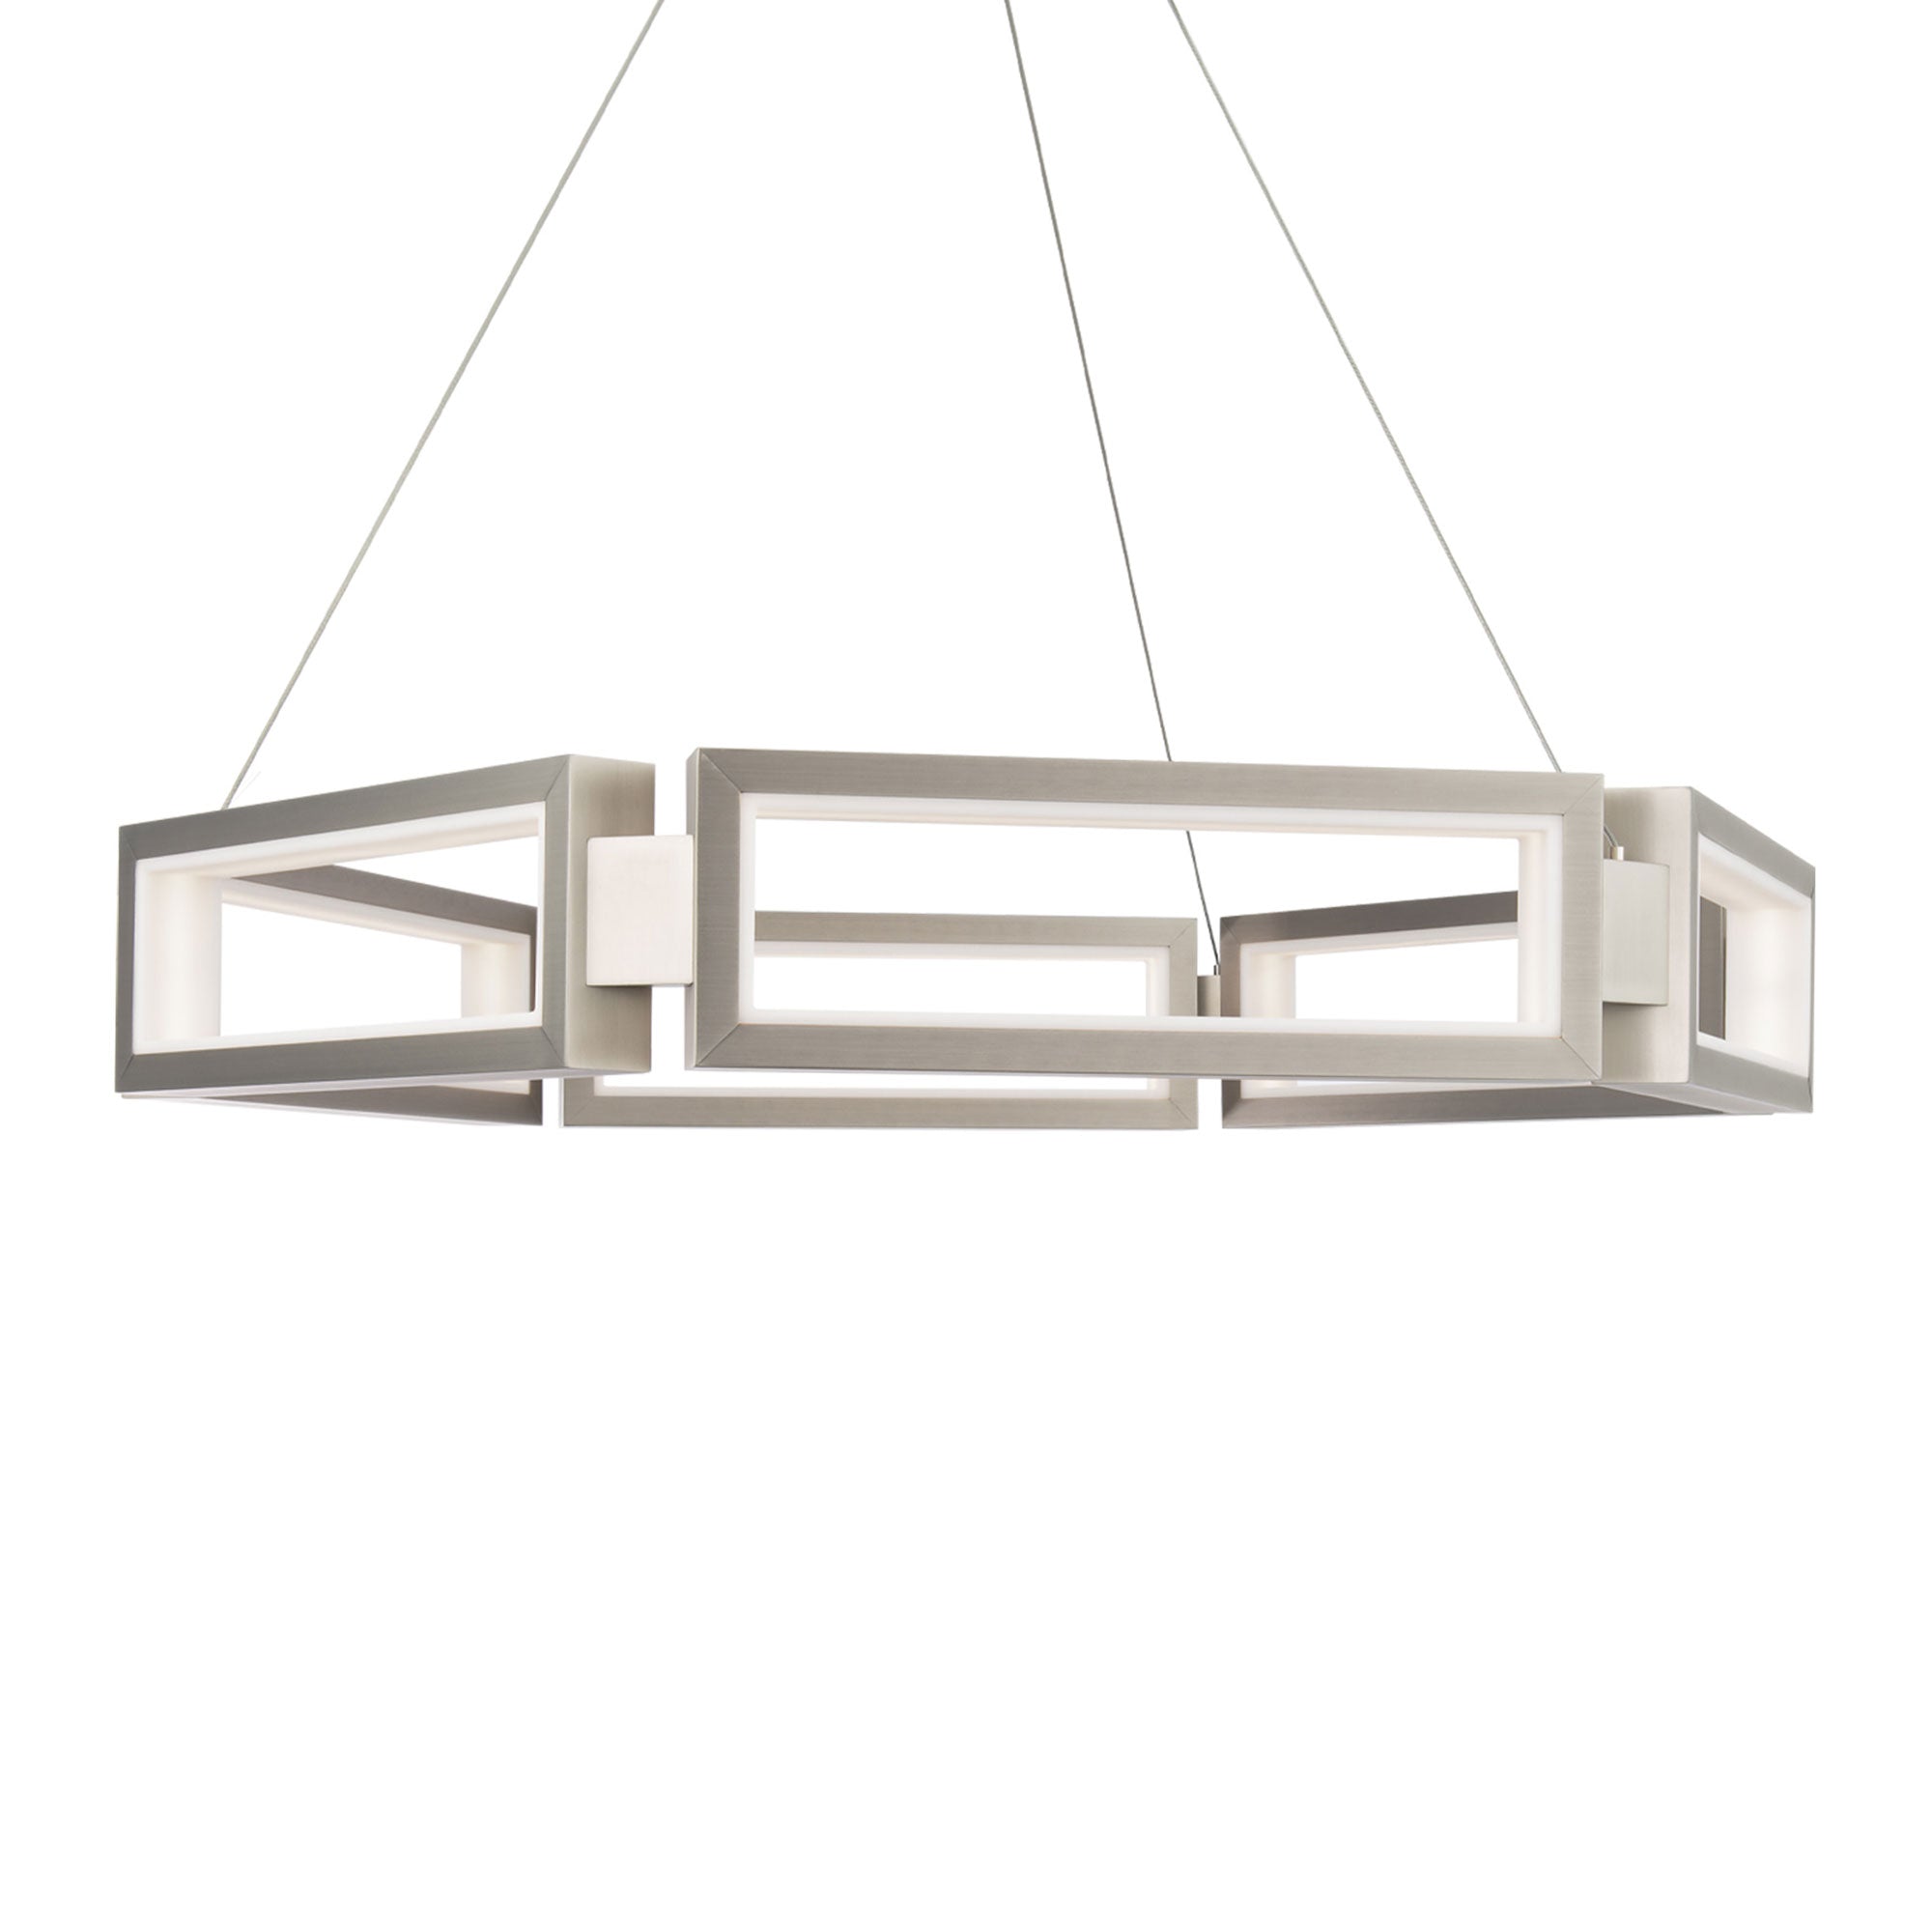 Mies 35" LED Chandelier